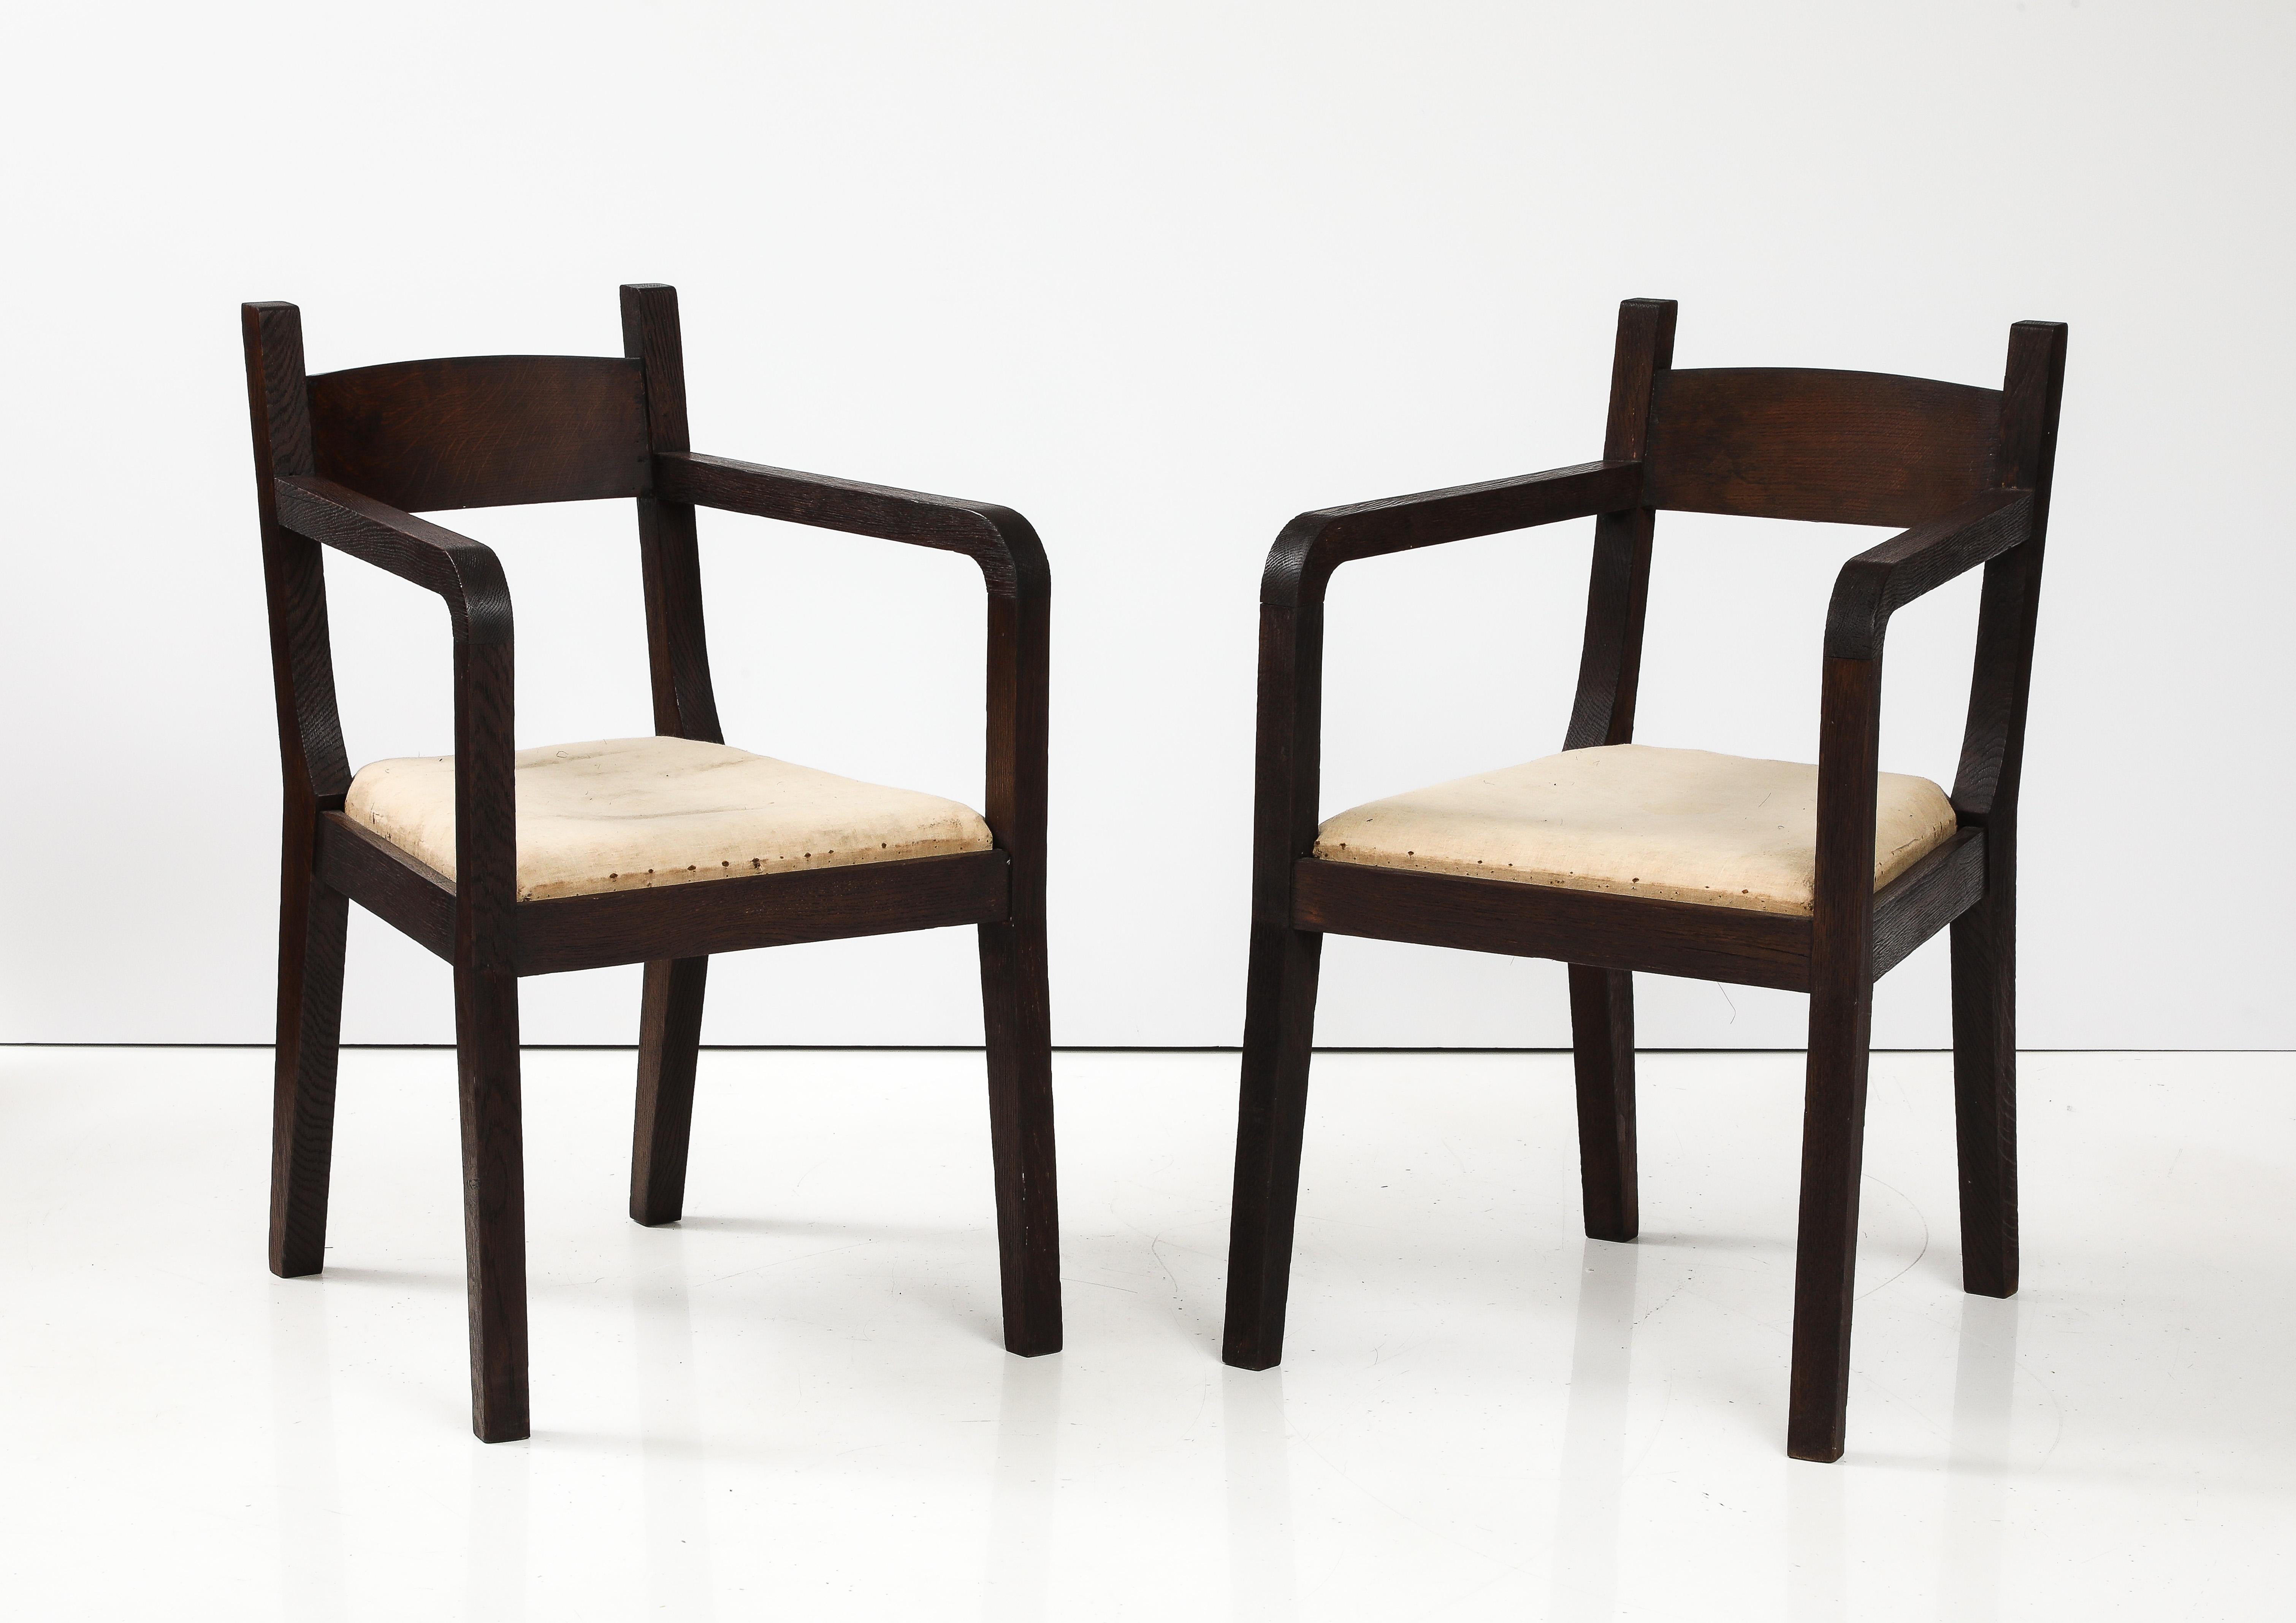 Early 20th Century Pair of Modernist Eyre de Lanux Armchairs in Brushed Oak, France, c. 1925